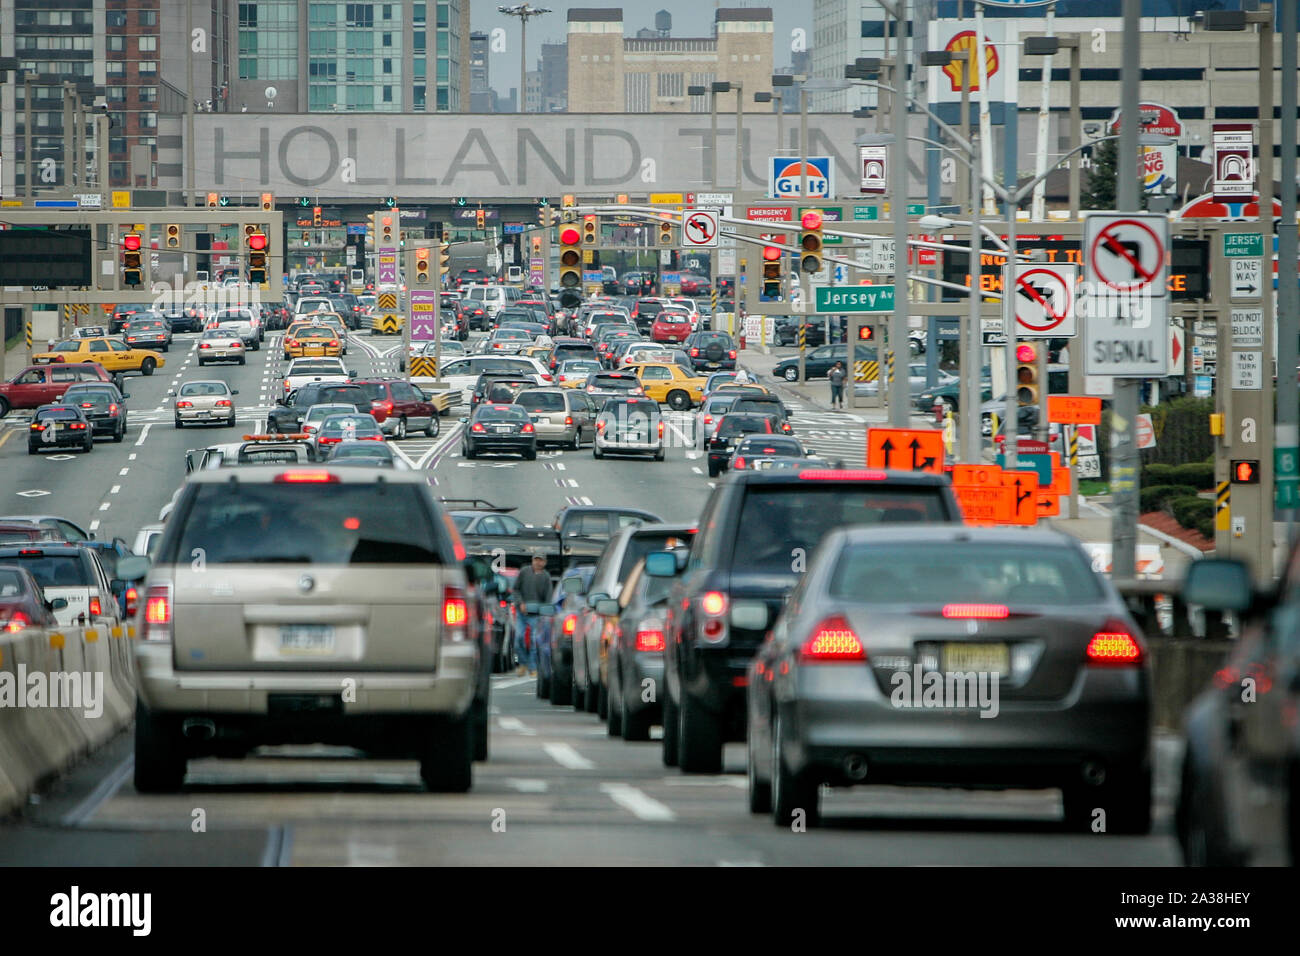 Traffic jam in front of the Holland Tunnel leading in to Manhattan. Stock Photo